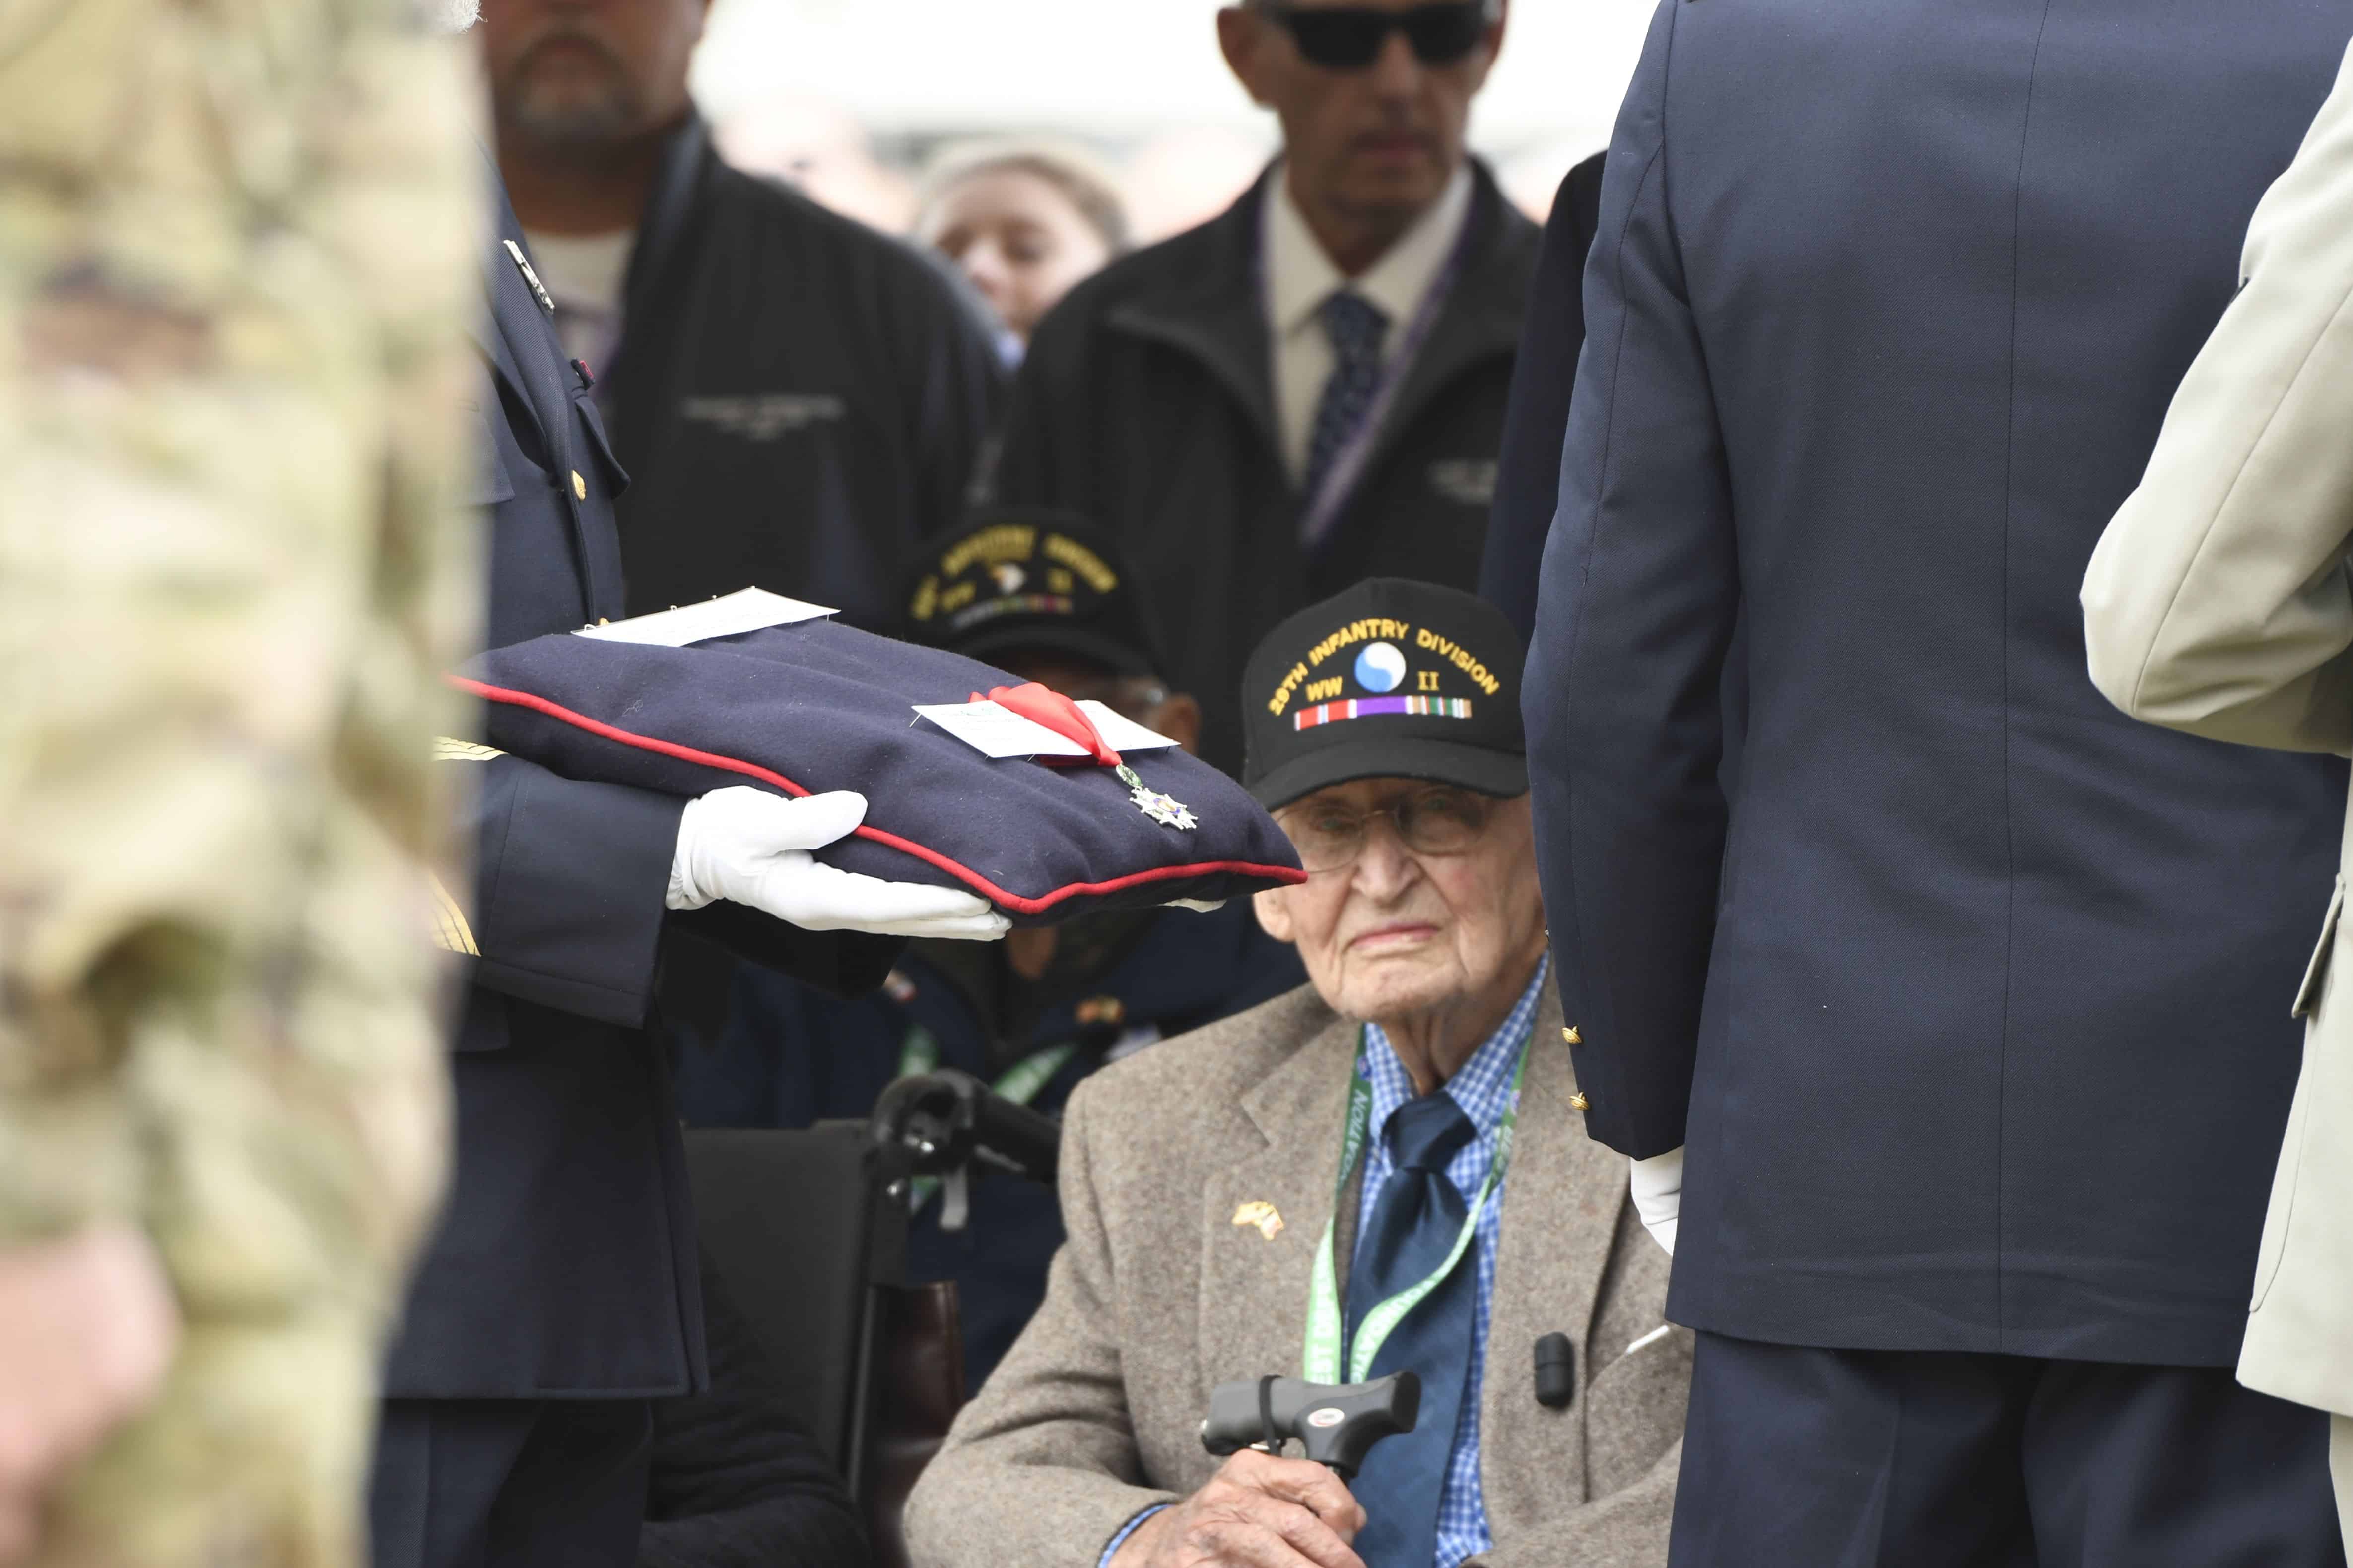 The French government bestowed the French Legion of Honor, the nation's highest military award for merit, to WWII veterans during the Cabbage Patch Ceremony June 3, 2022